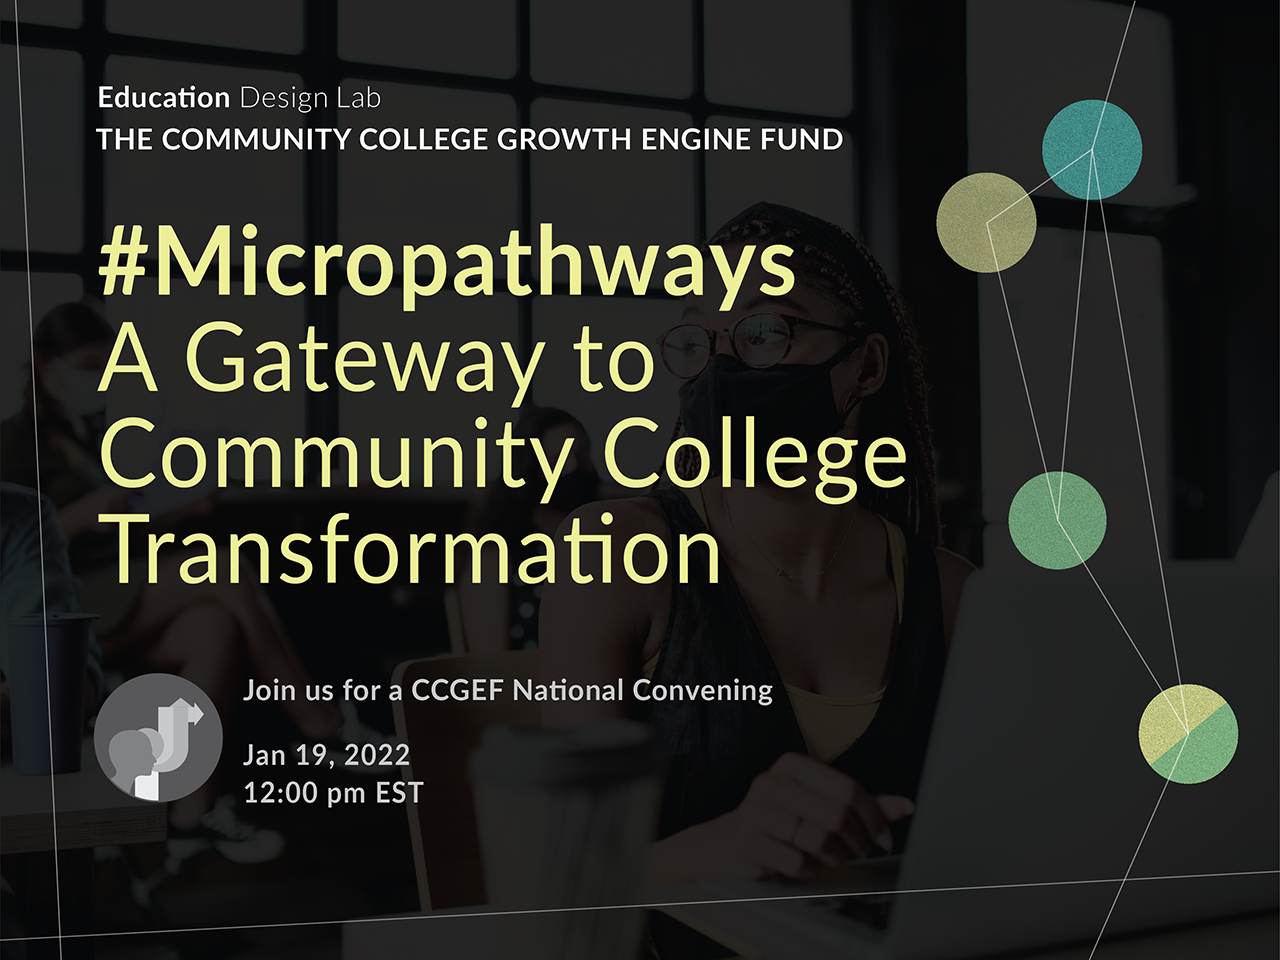 Accelerating Community College Transformation #CCGEF #Micropathways